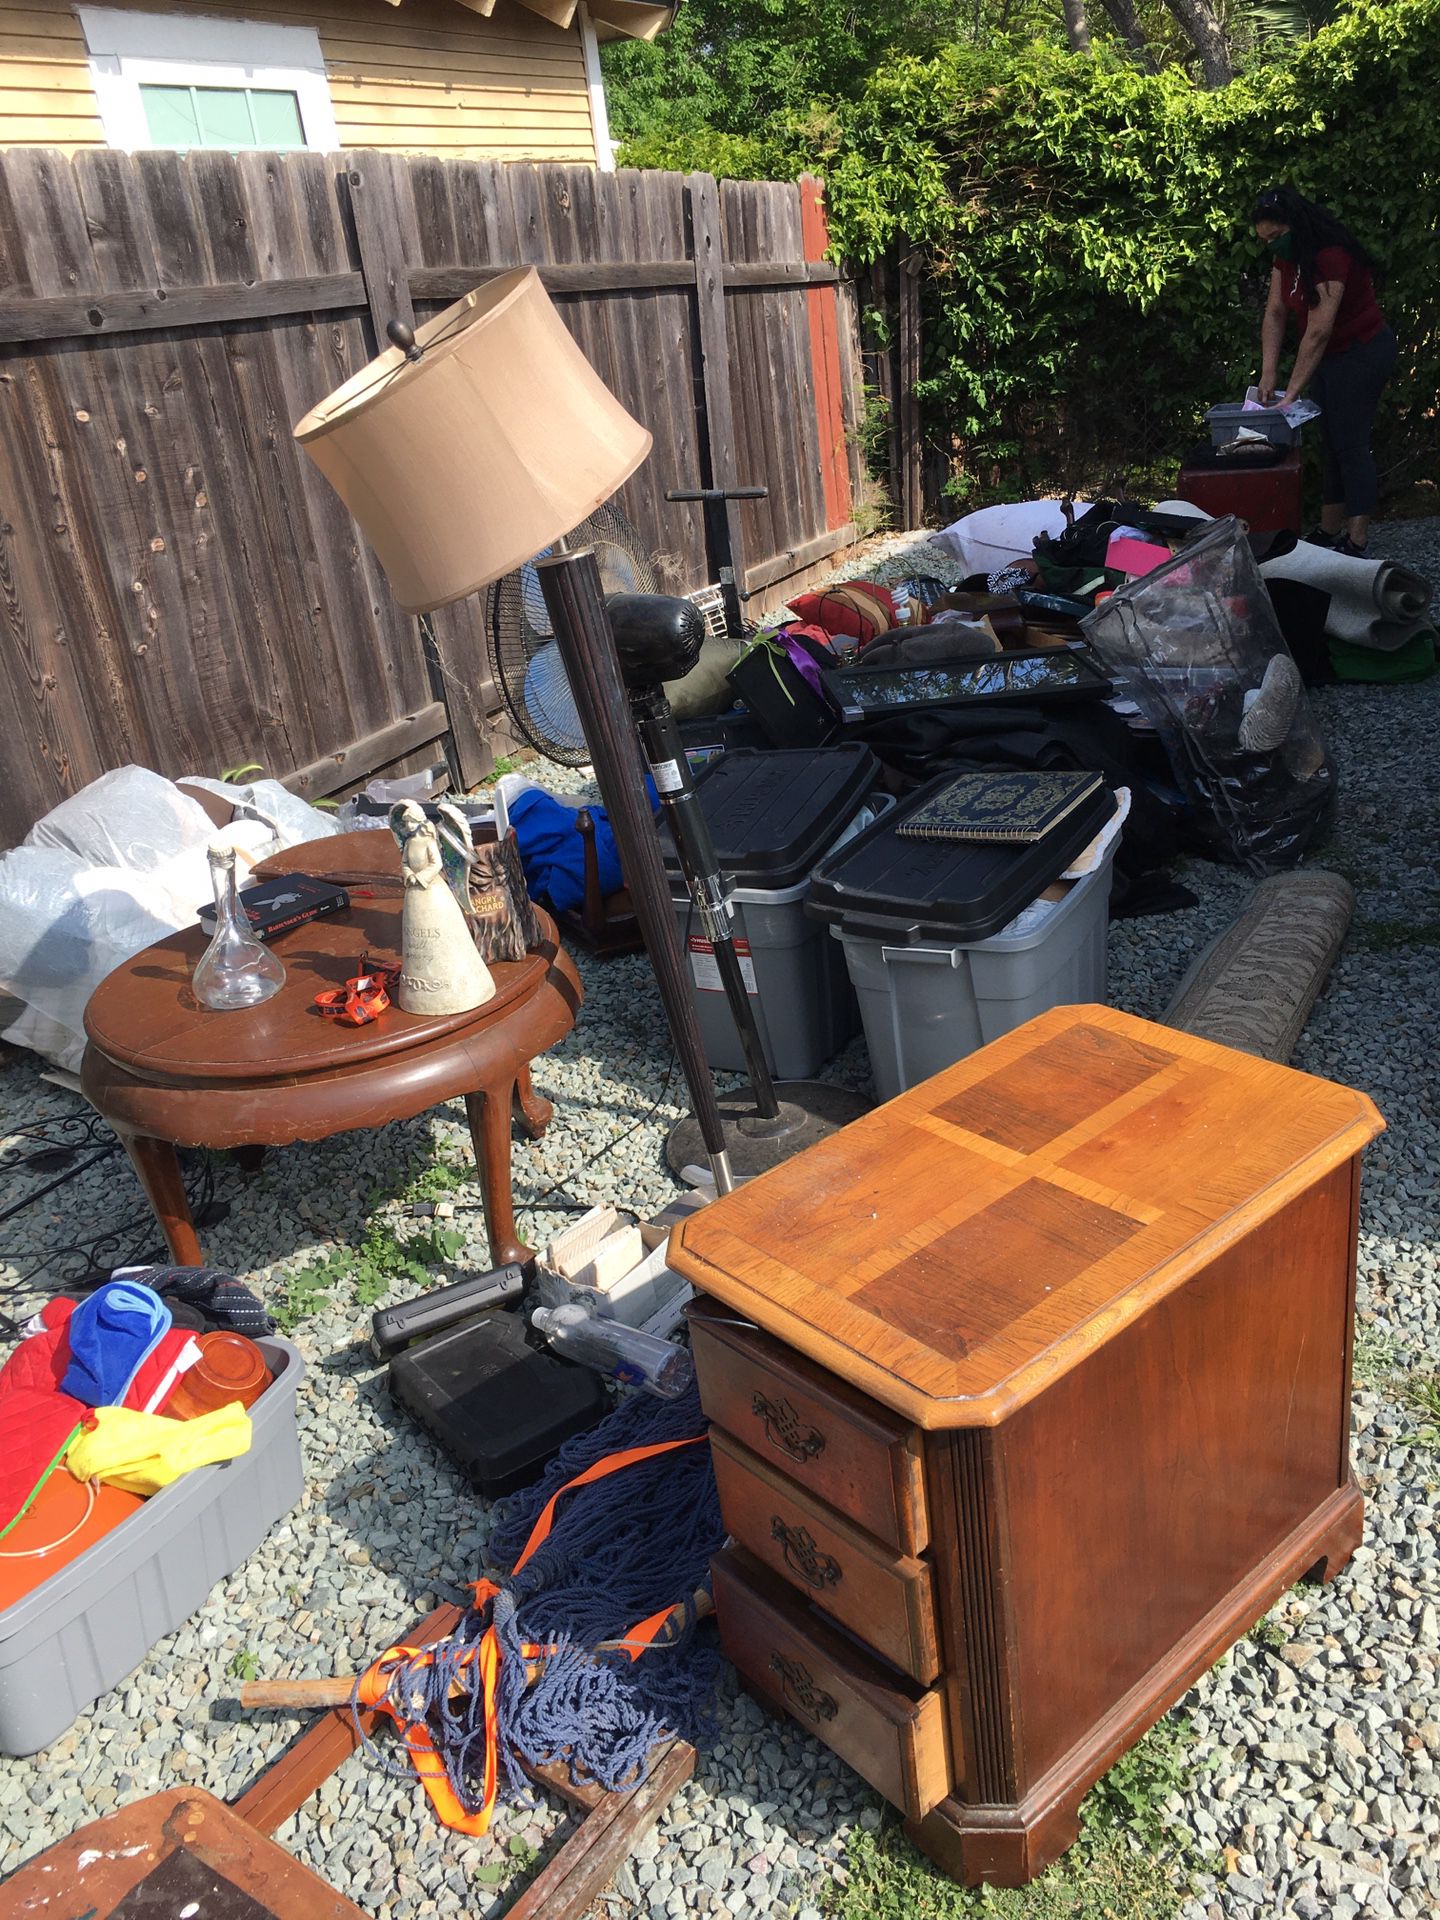 Free stuff furniture and clothes and elec